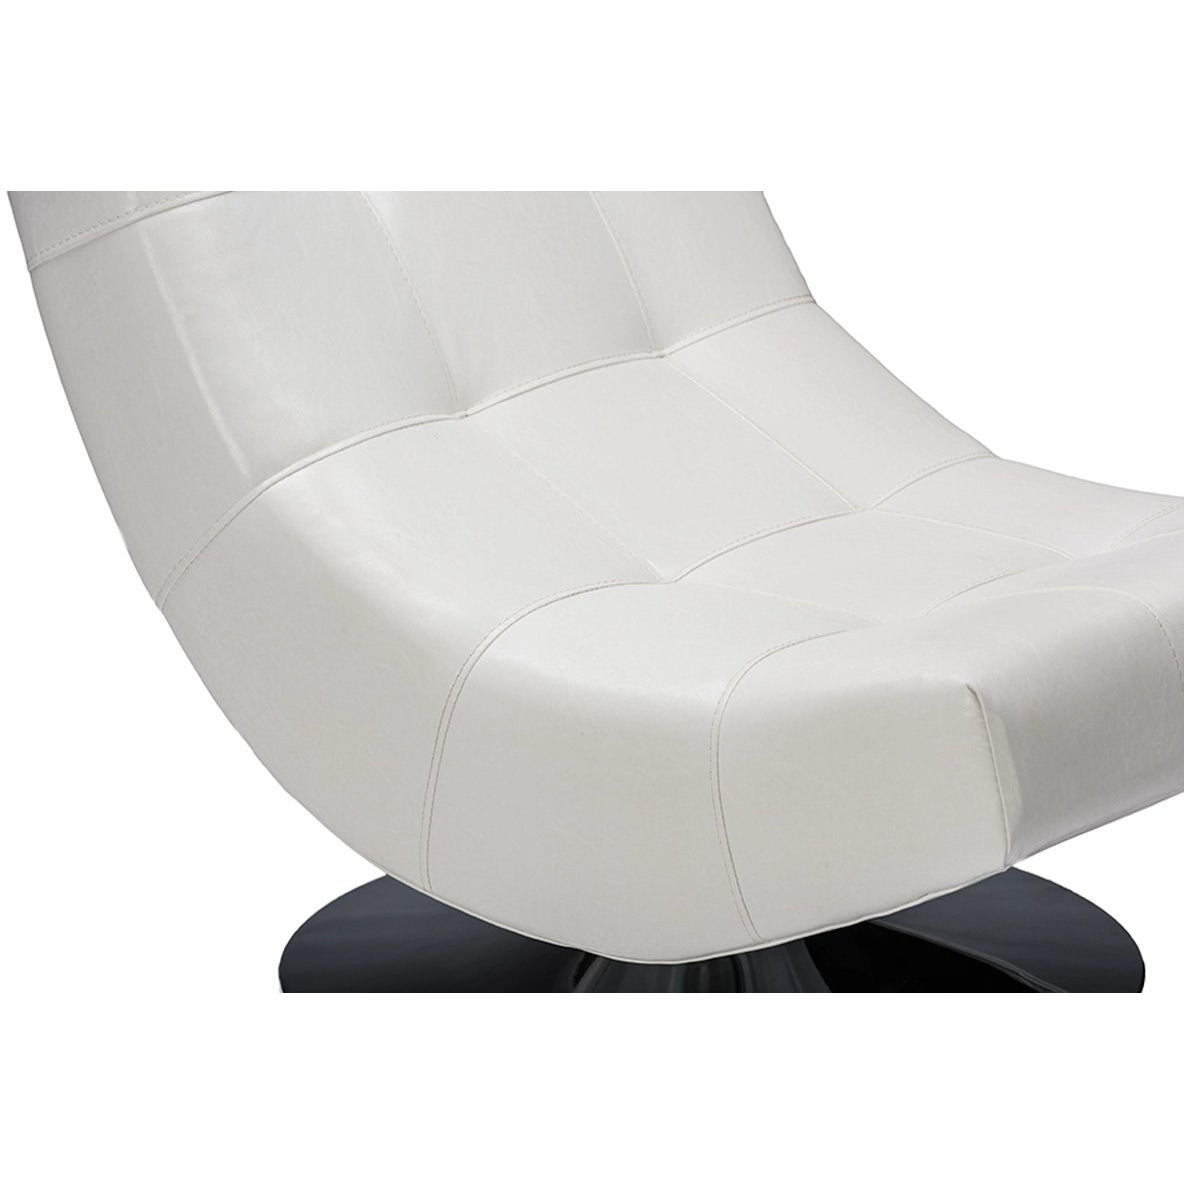 Baxton Studio Baxton Studio Elsa Modern and Contemporary White Faux Leather Upholstered Swivel Chair with Metal Base Baxton Studio-chairs-Minimal And Modern - 5